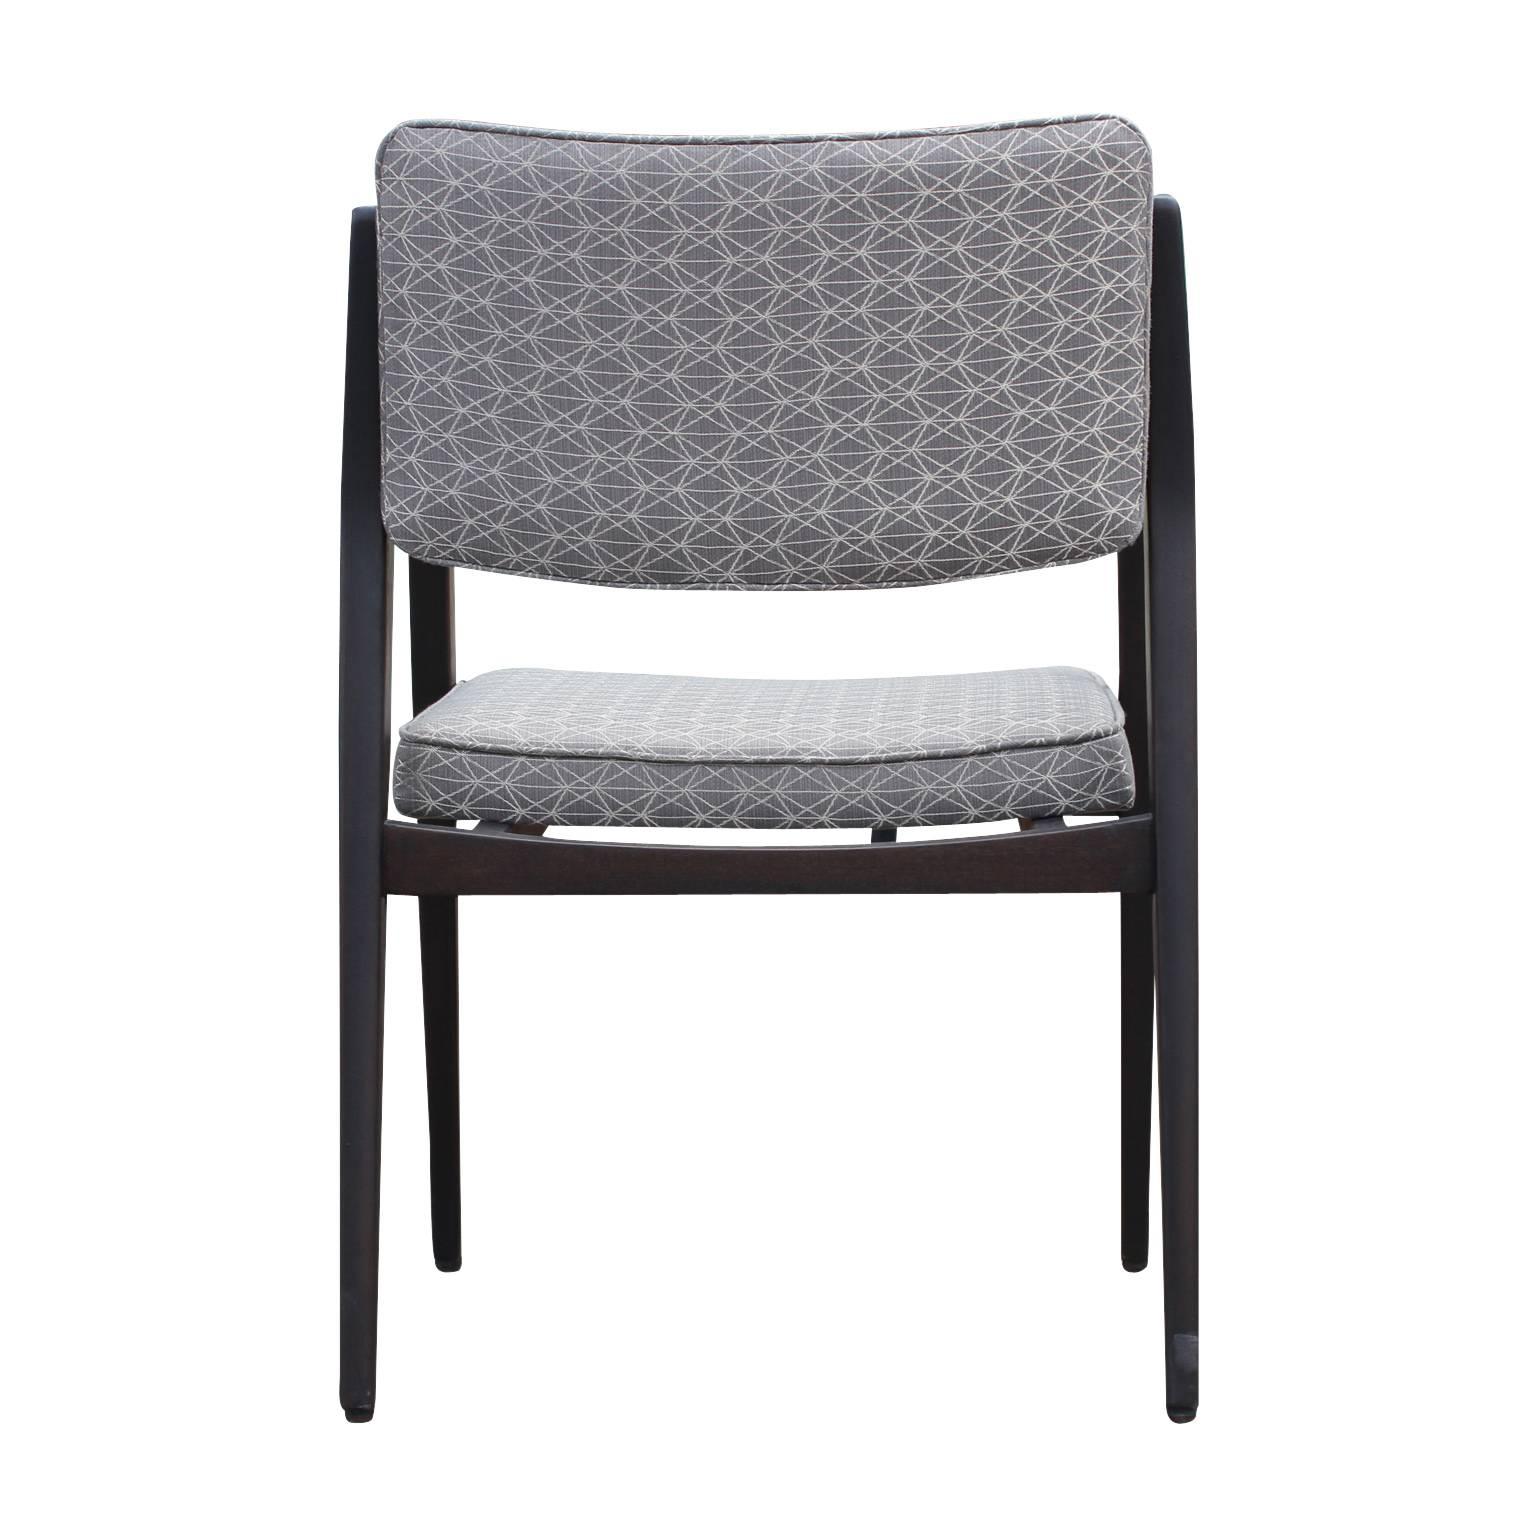 Mid-20th Century Set of Four Italian Modern Charcoal Dining Armchairs in Grey Patterned Fabric